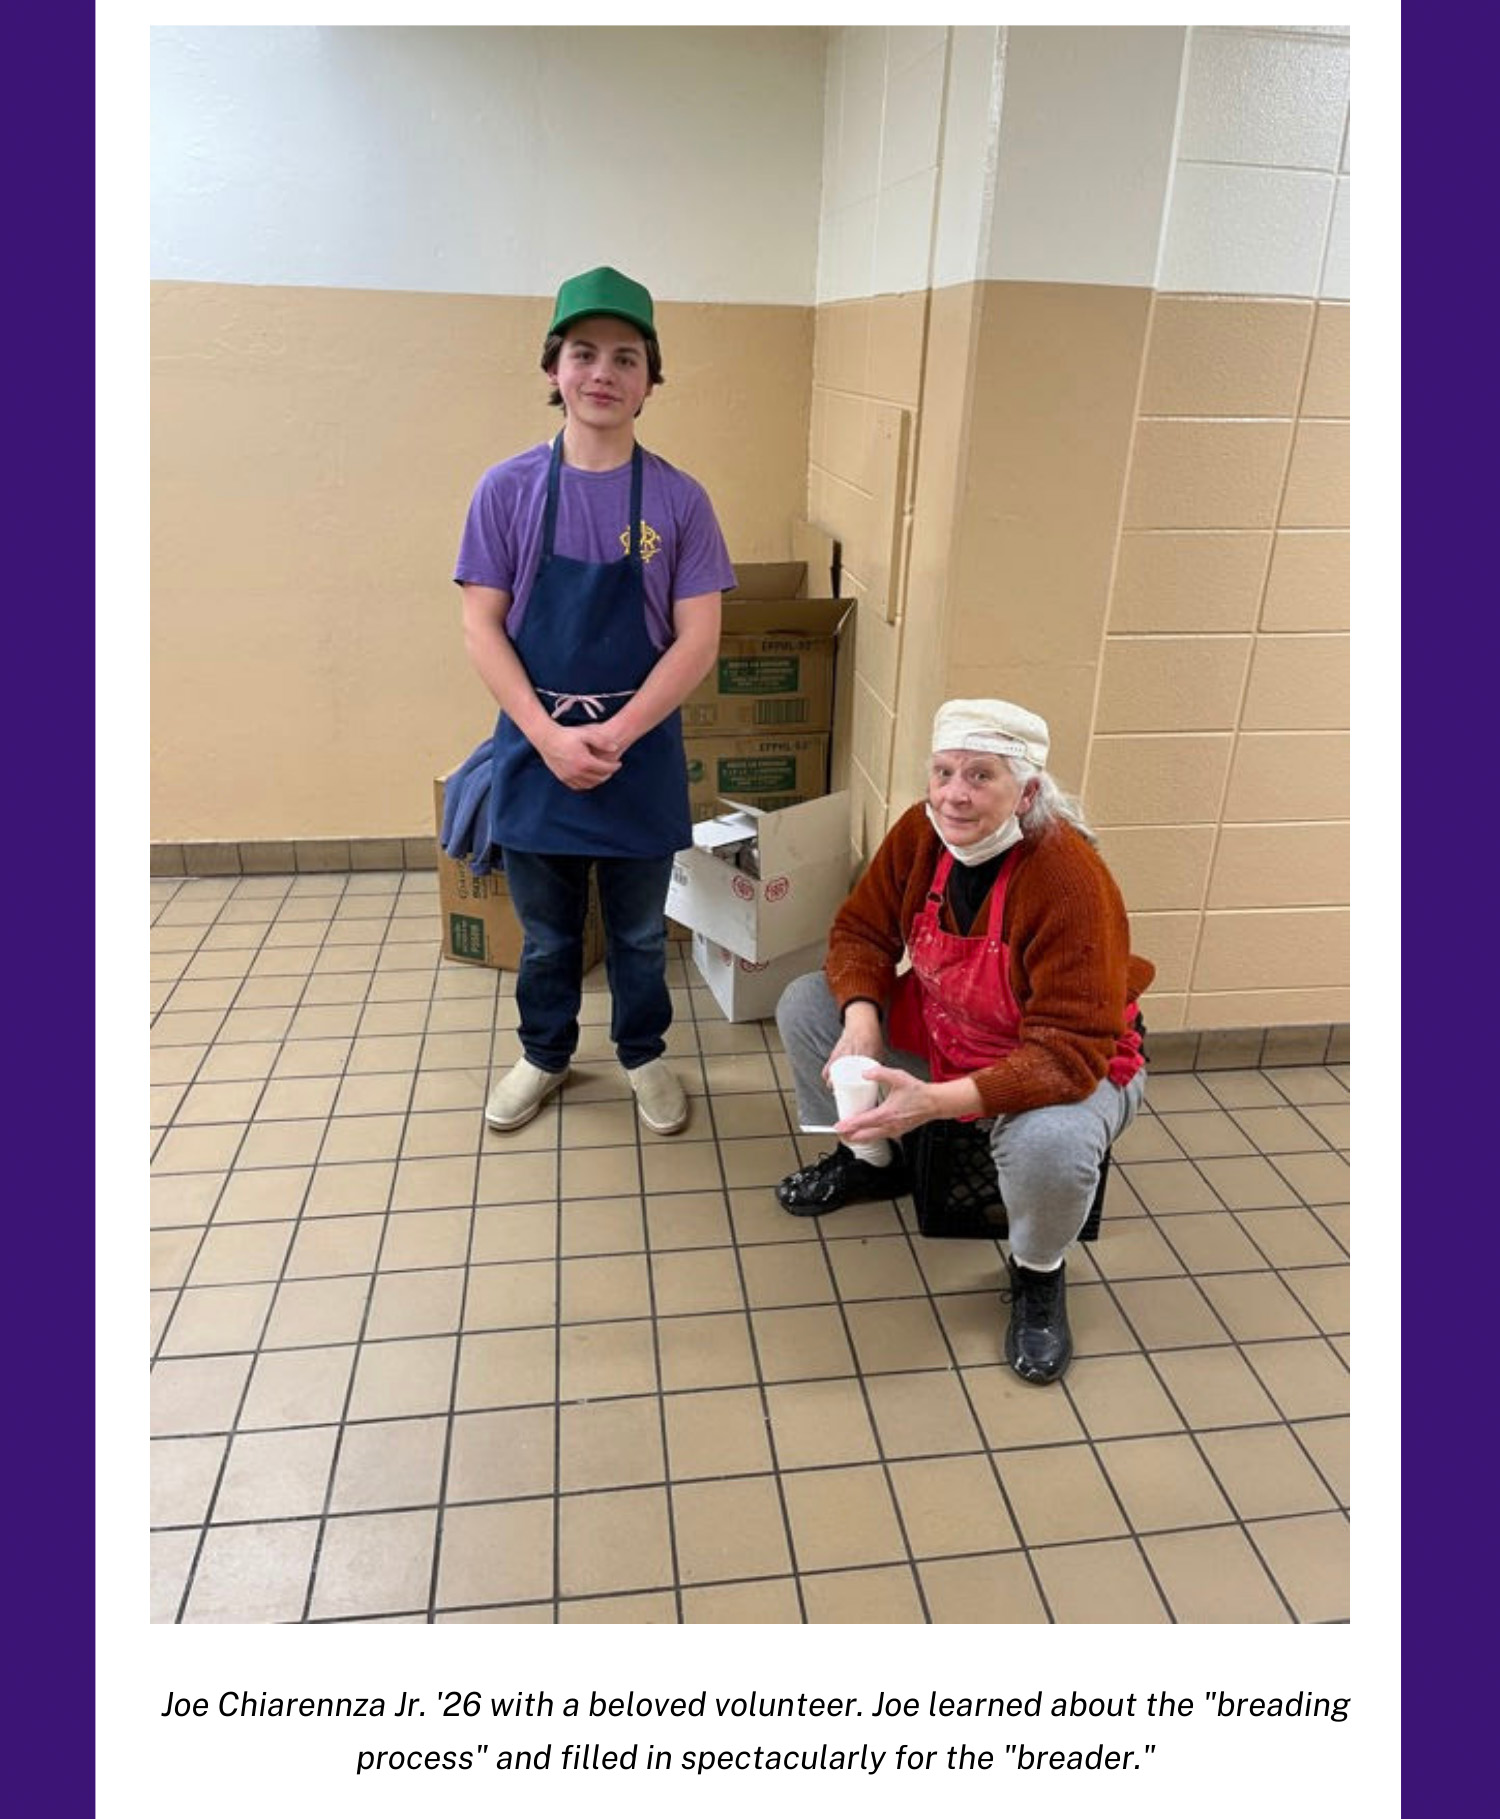 Christian Brothers Academy in Syracuse, NY student with a beloved volunteer. He learned about the "breading process" and filled in spectacularly for the "breader".